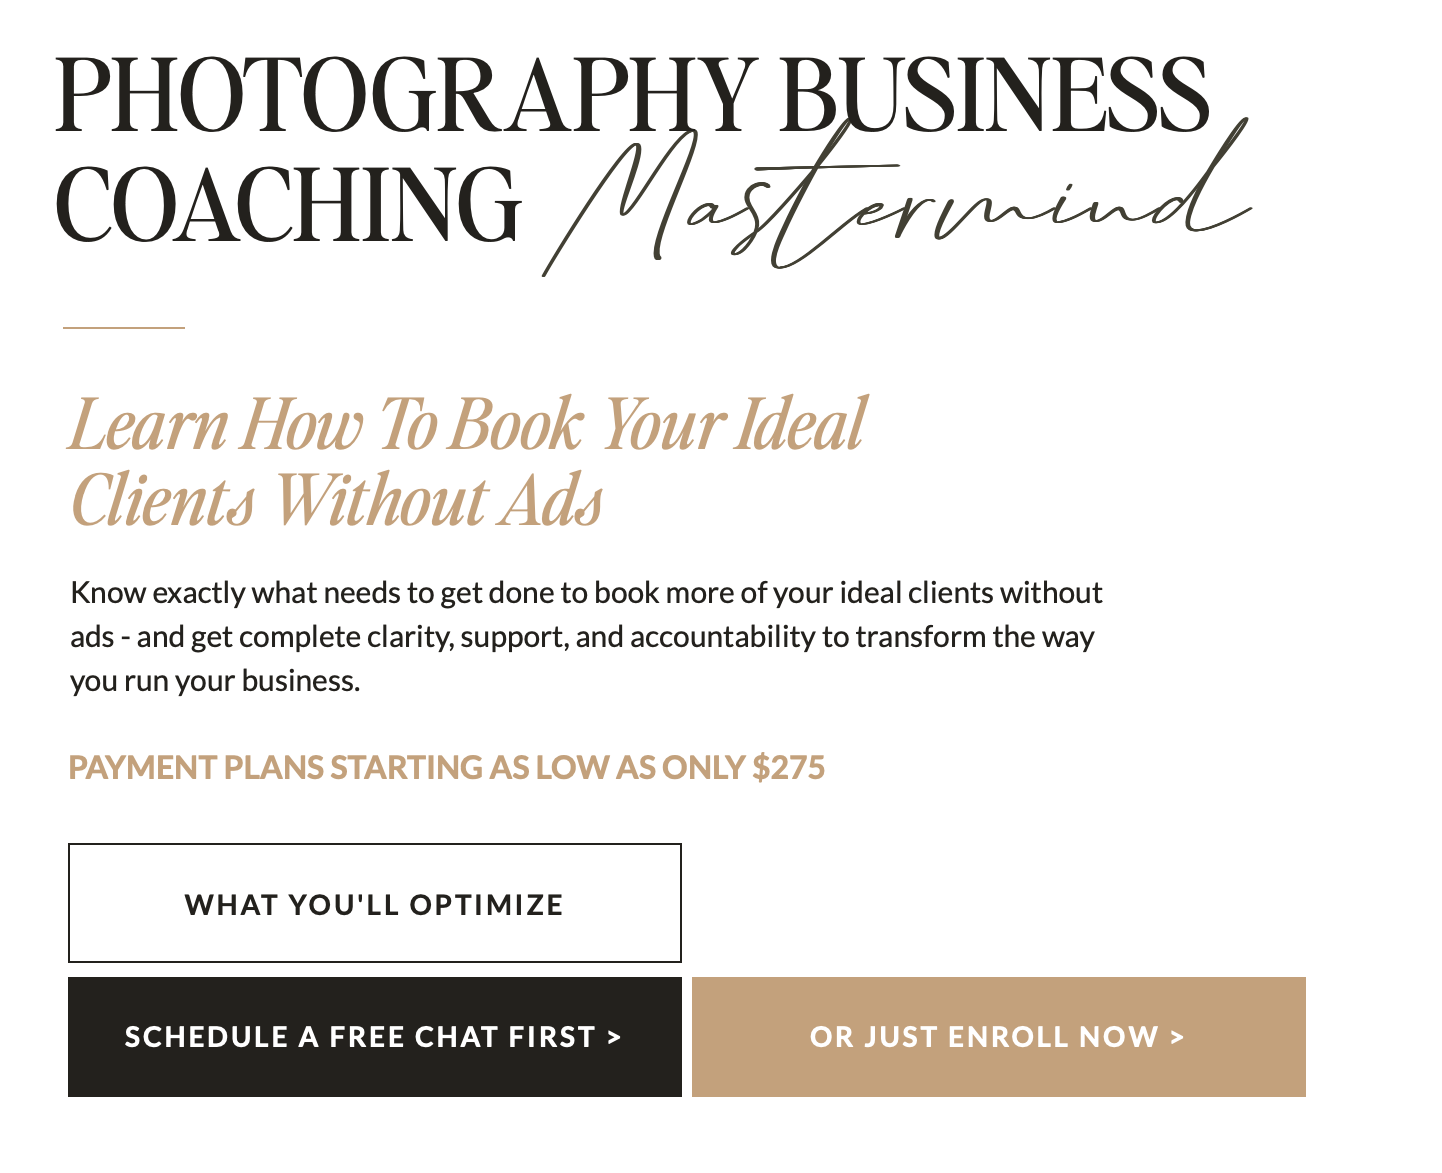 kyle goldies photography business coaching mastermind